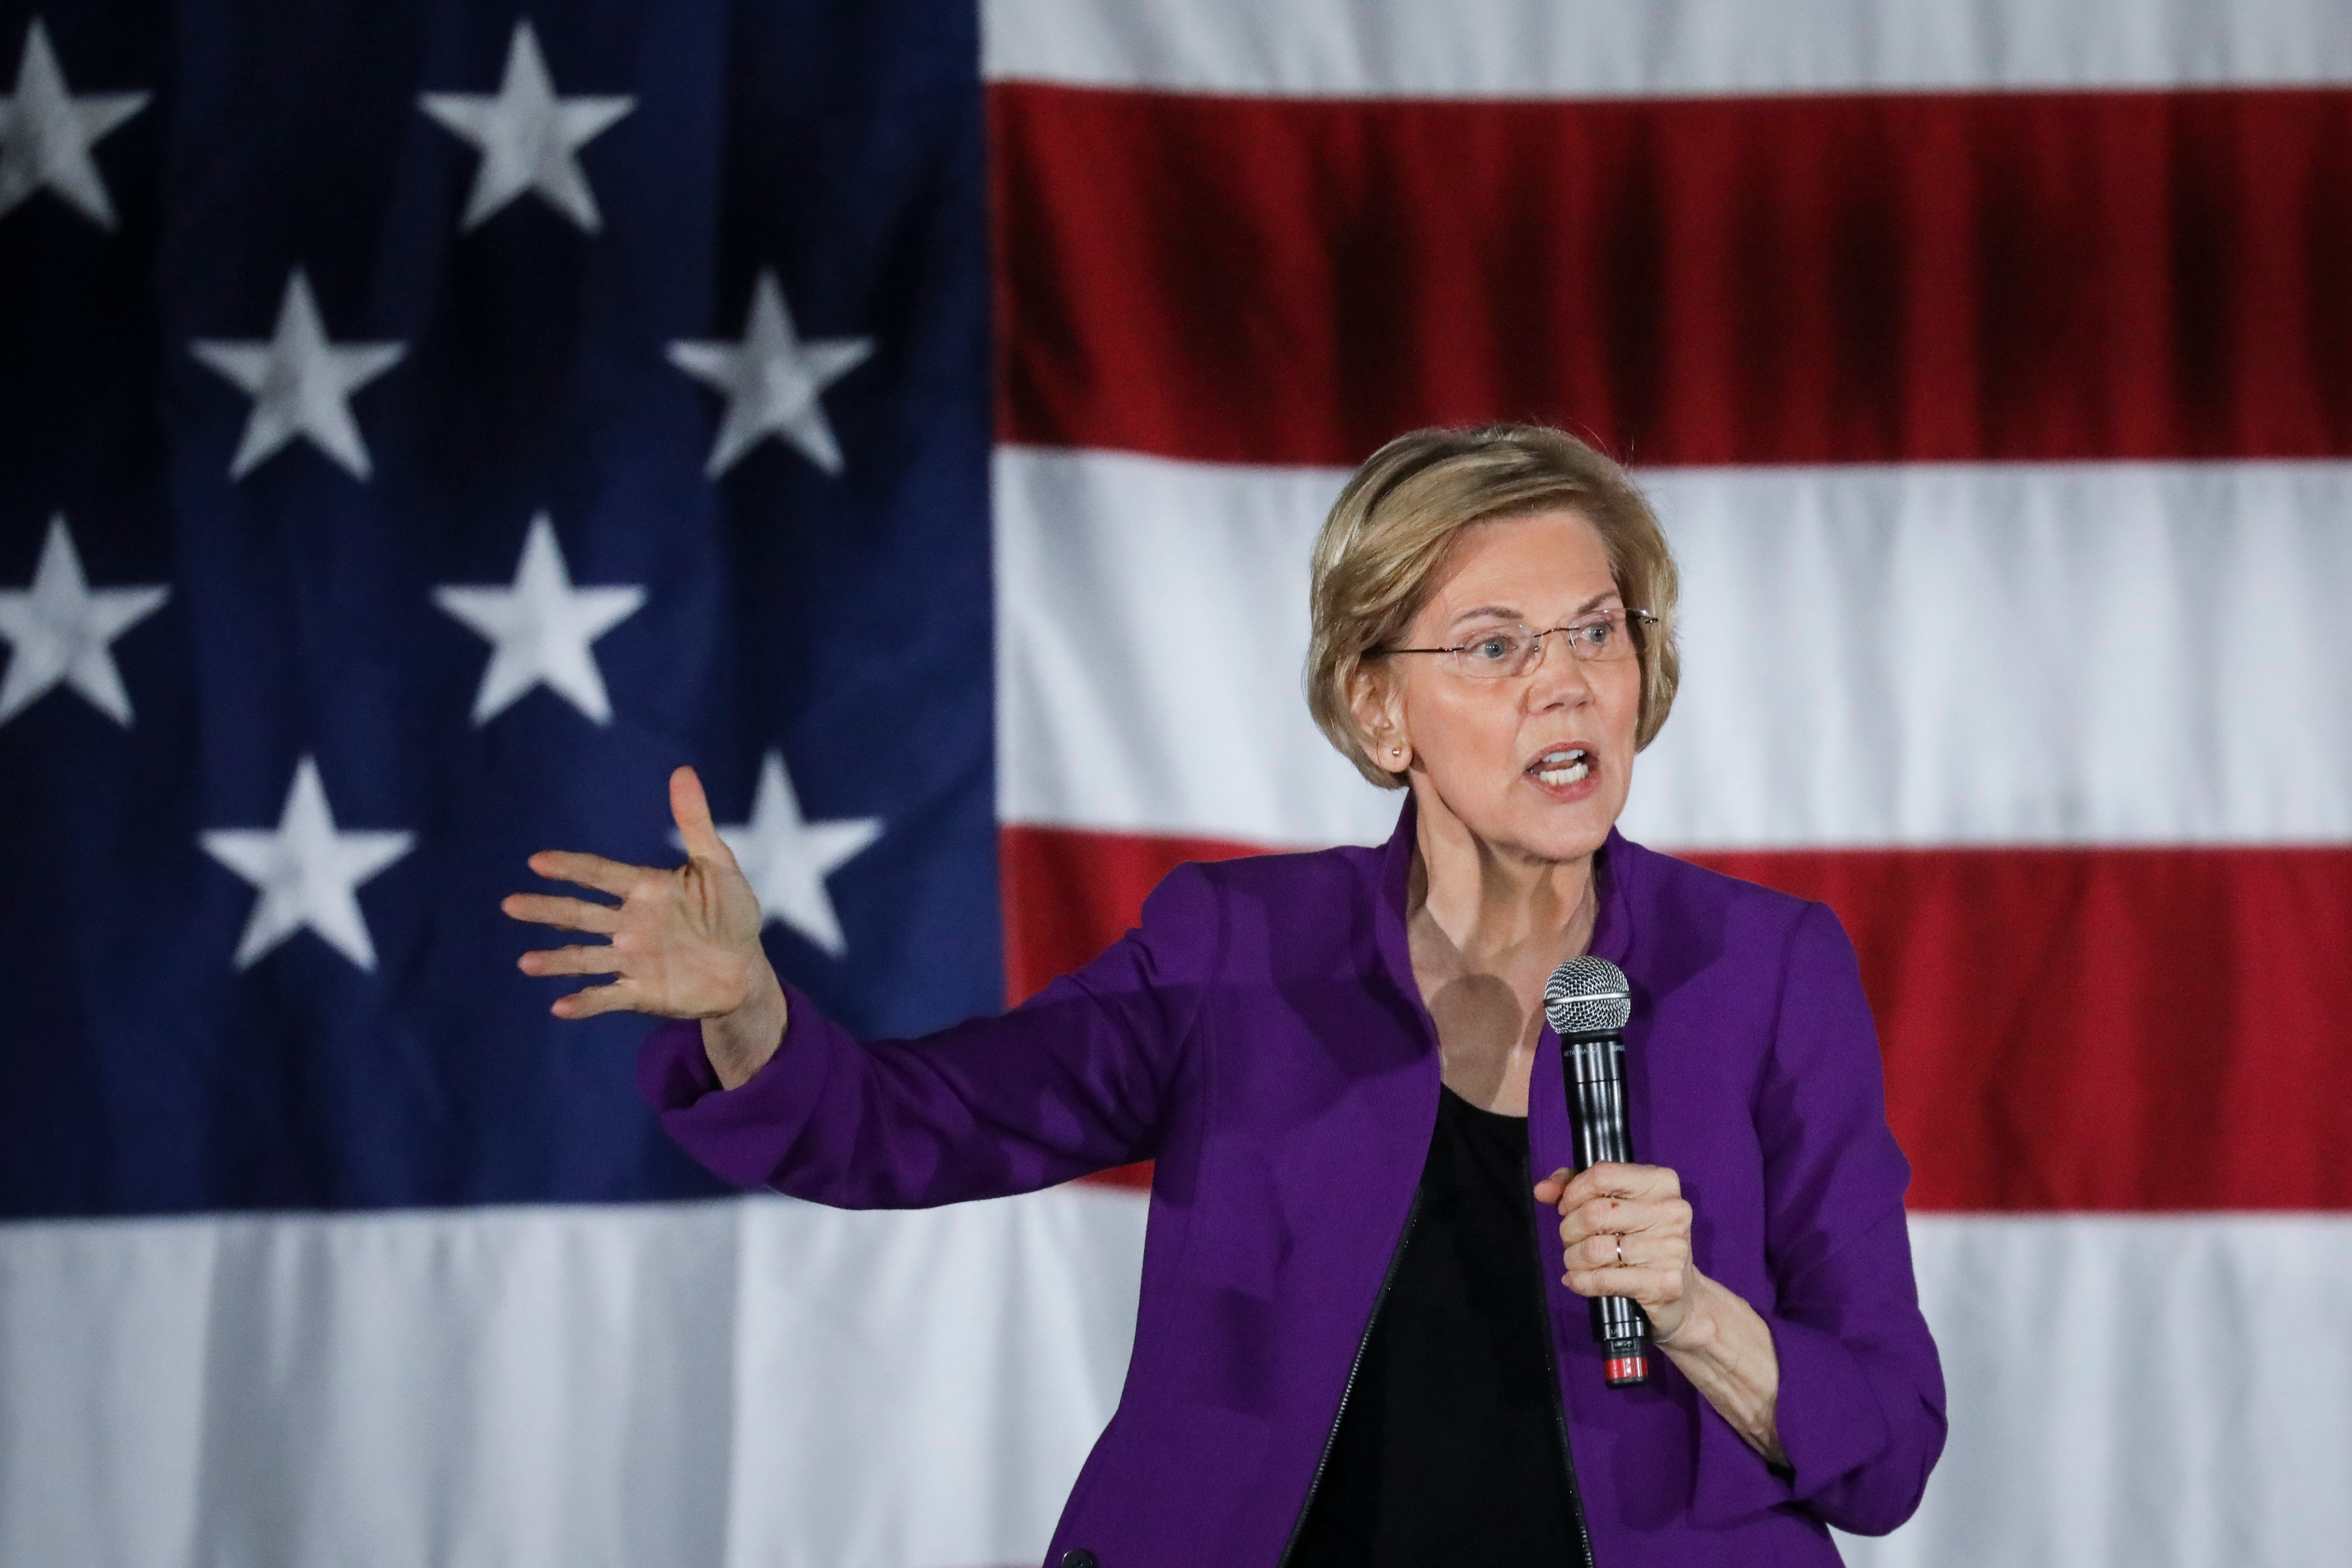 Sen. Elizabeth Warren (D-MA), one of several Democrats running for the party's nomination in the 2020 presidential race, speaks during a campaign event, March 8, 2019 in Queens, New York. (Drew Angerer—Getty Images) (Drew Angerer—Getty Images)